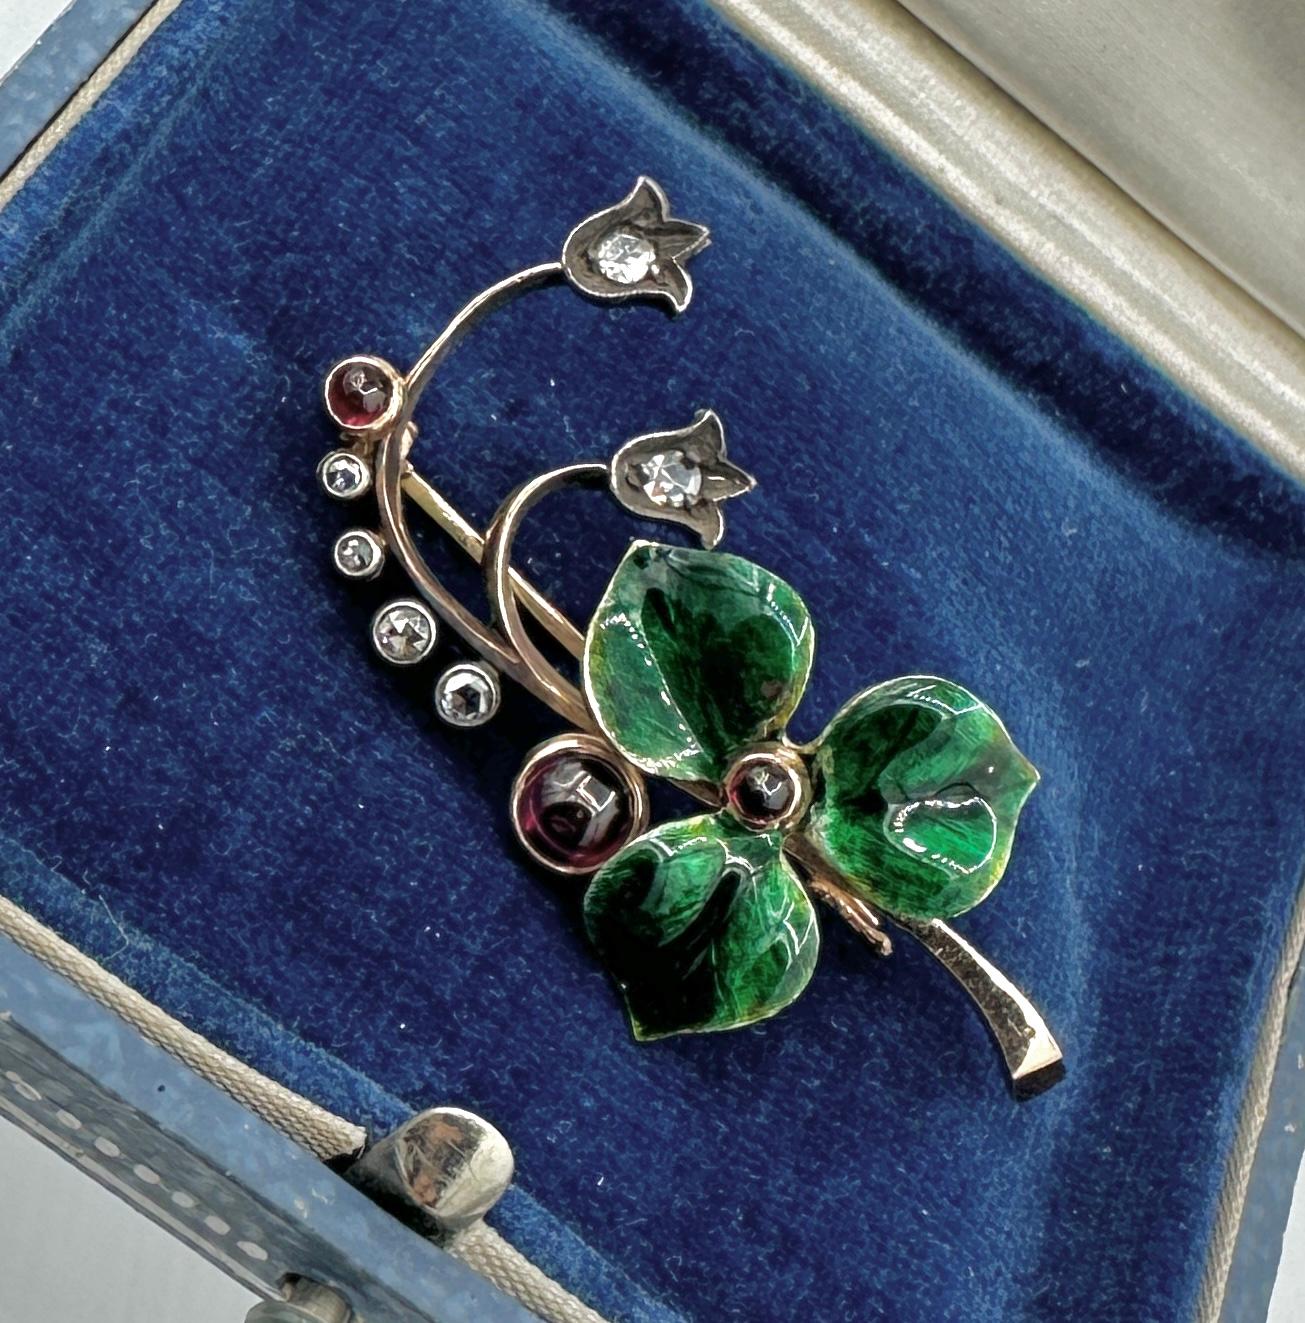 This is an exquisite and rare antique FABERGÉ Rose Cut Diamond, Enamel and Red Cabochon Brooch modeled as a sprig of flowers with a translucent green enameled flower centered with a red cabochon and the tendrils terminated in tulip form flowerheads